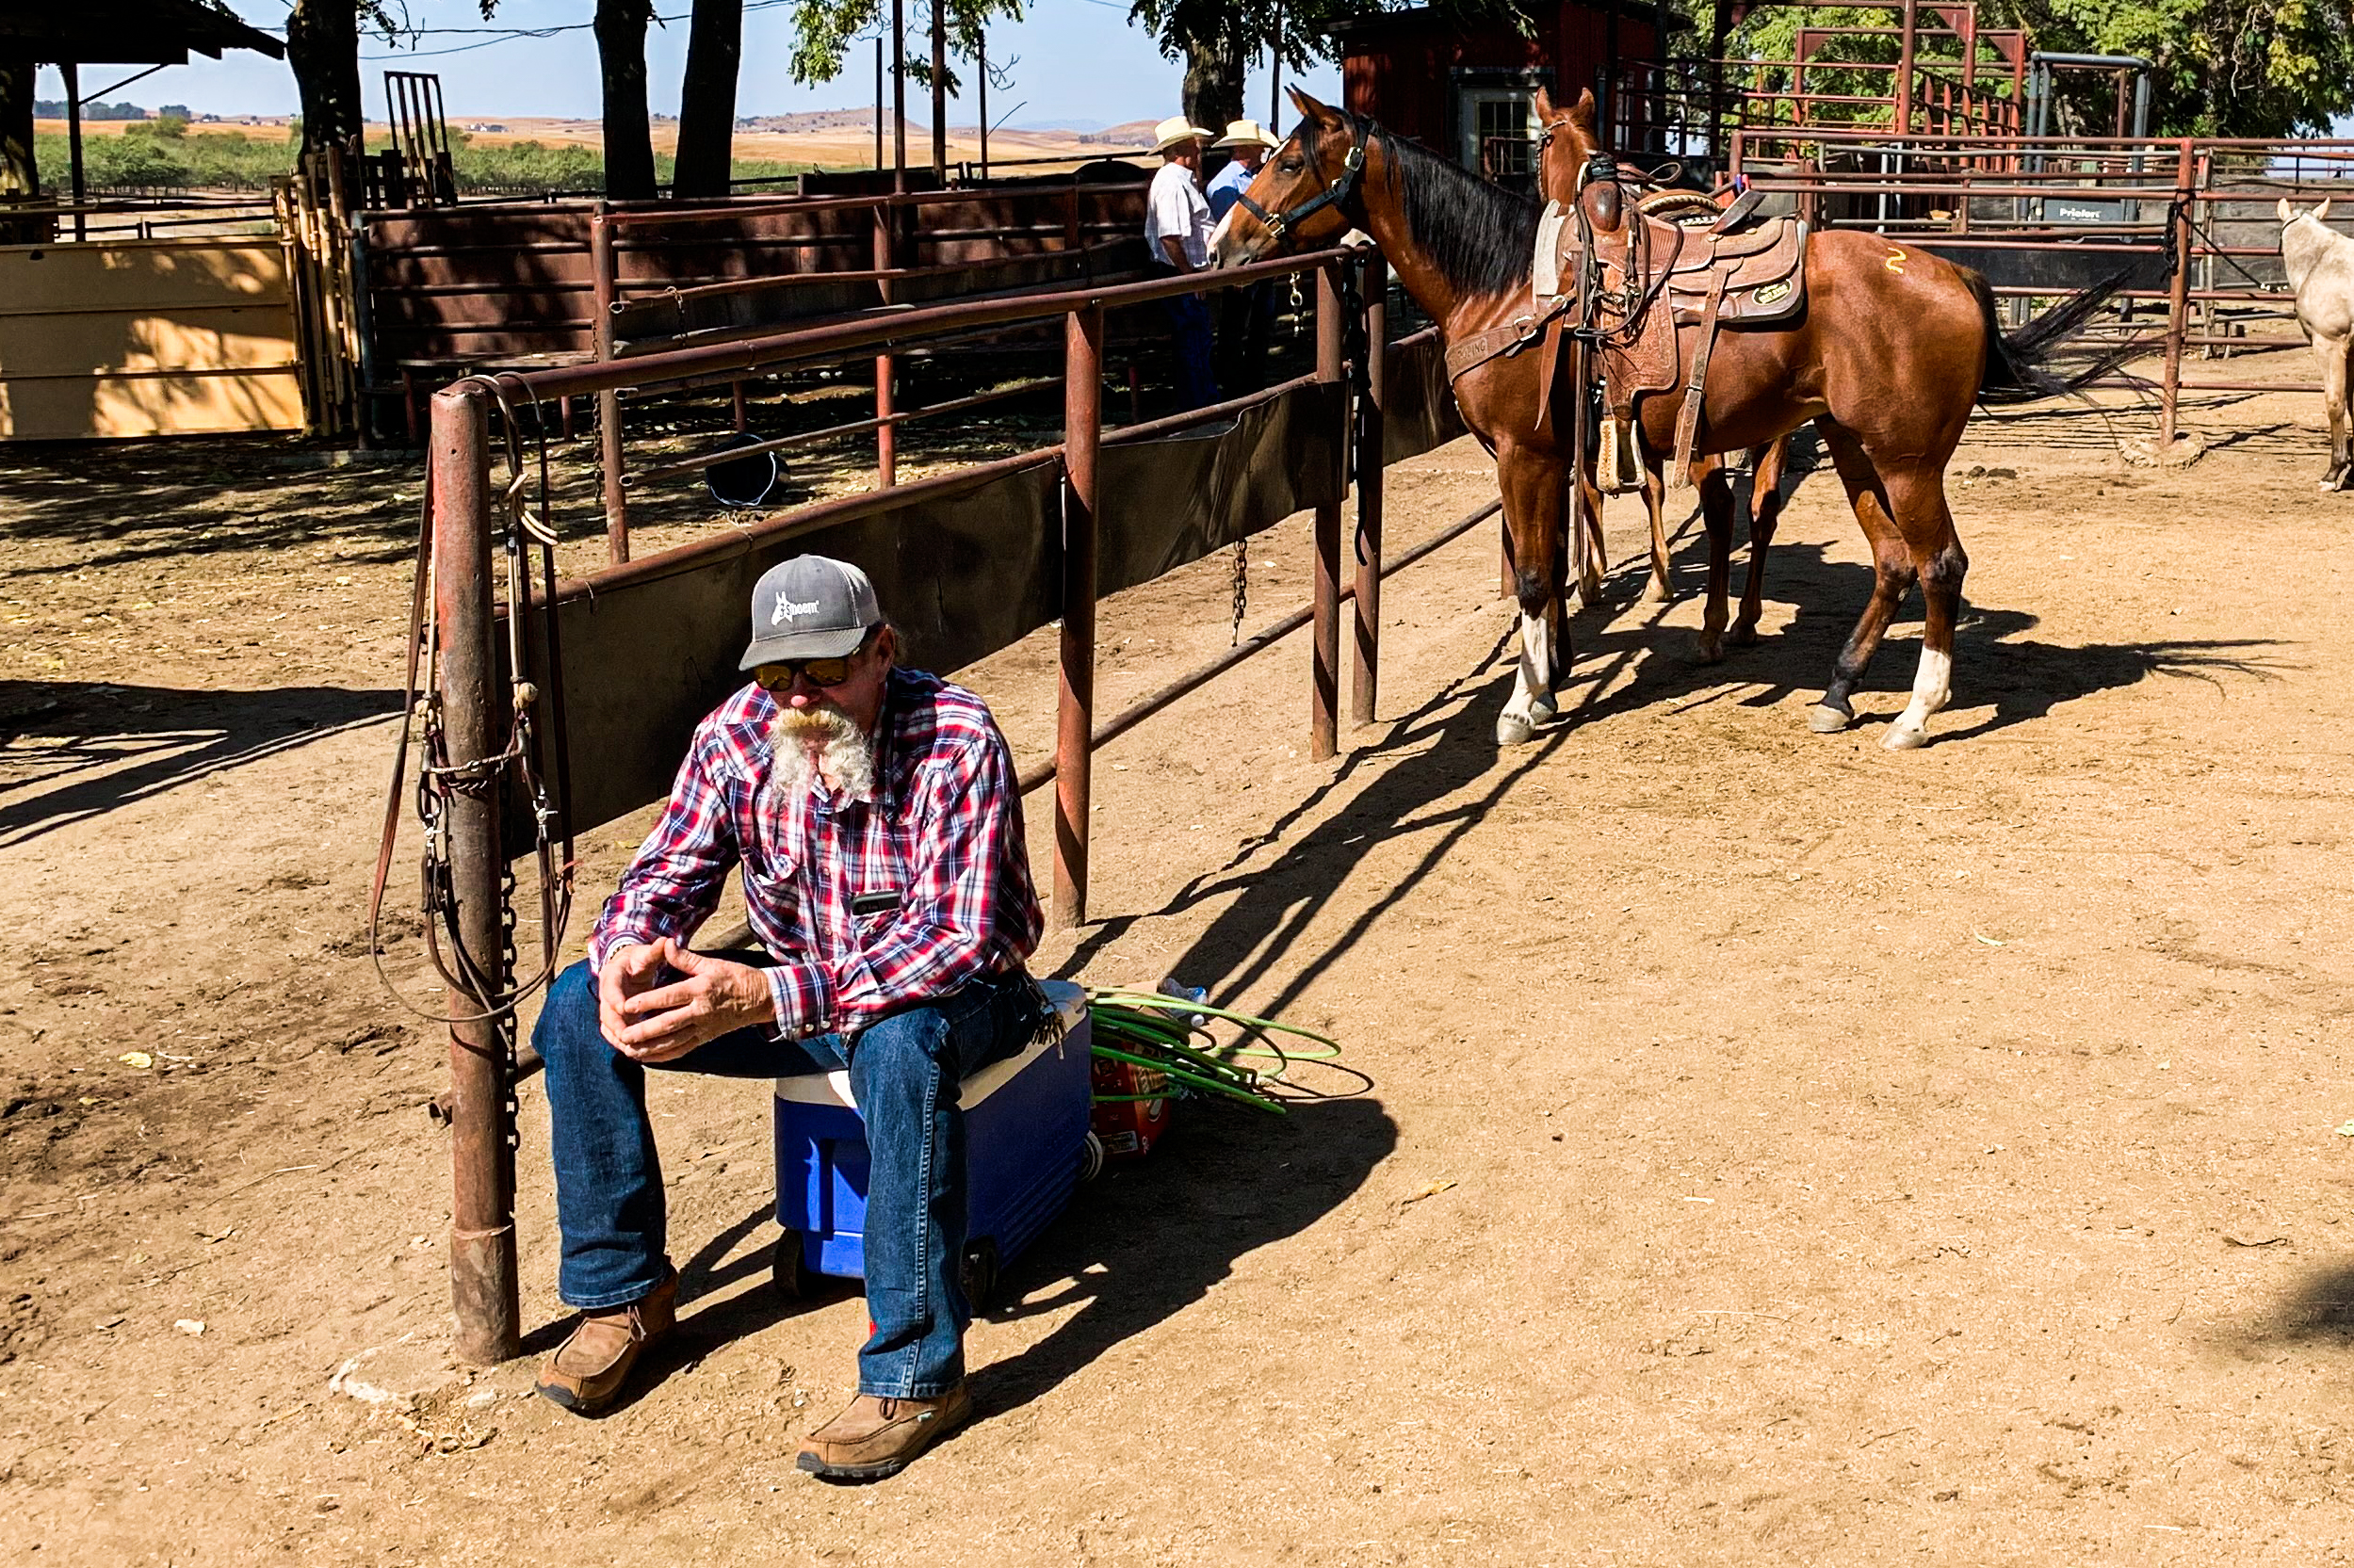 A man keeps watch over horses penned before auction